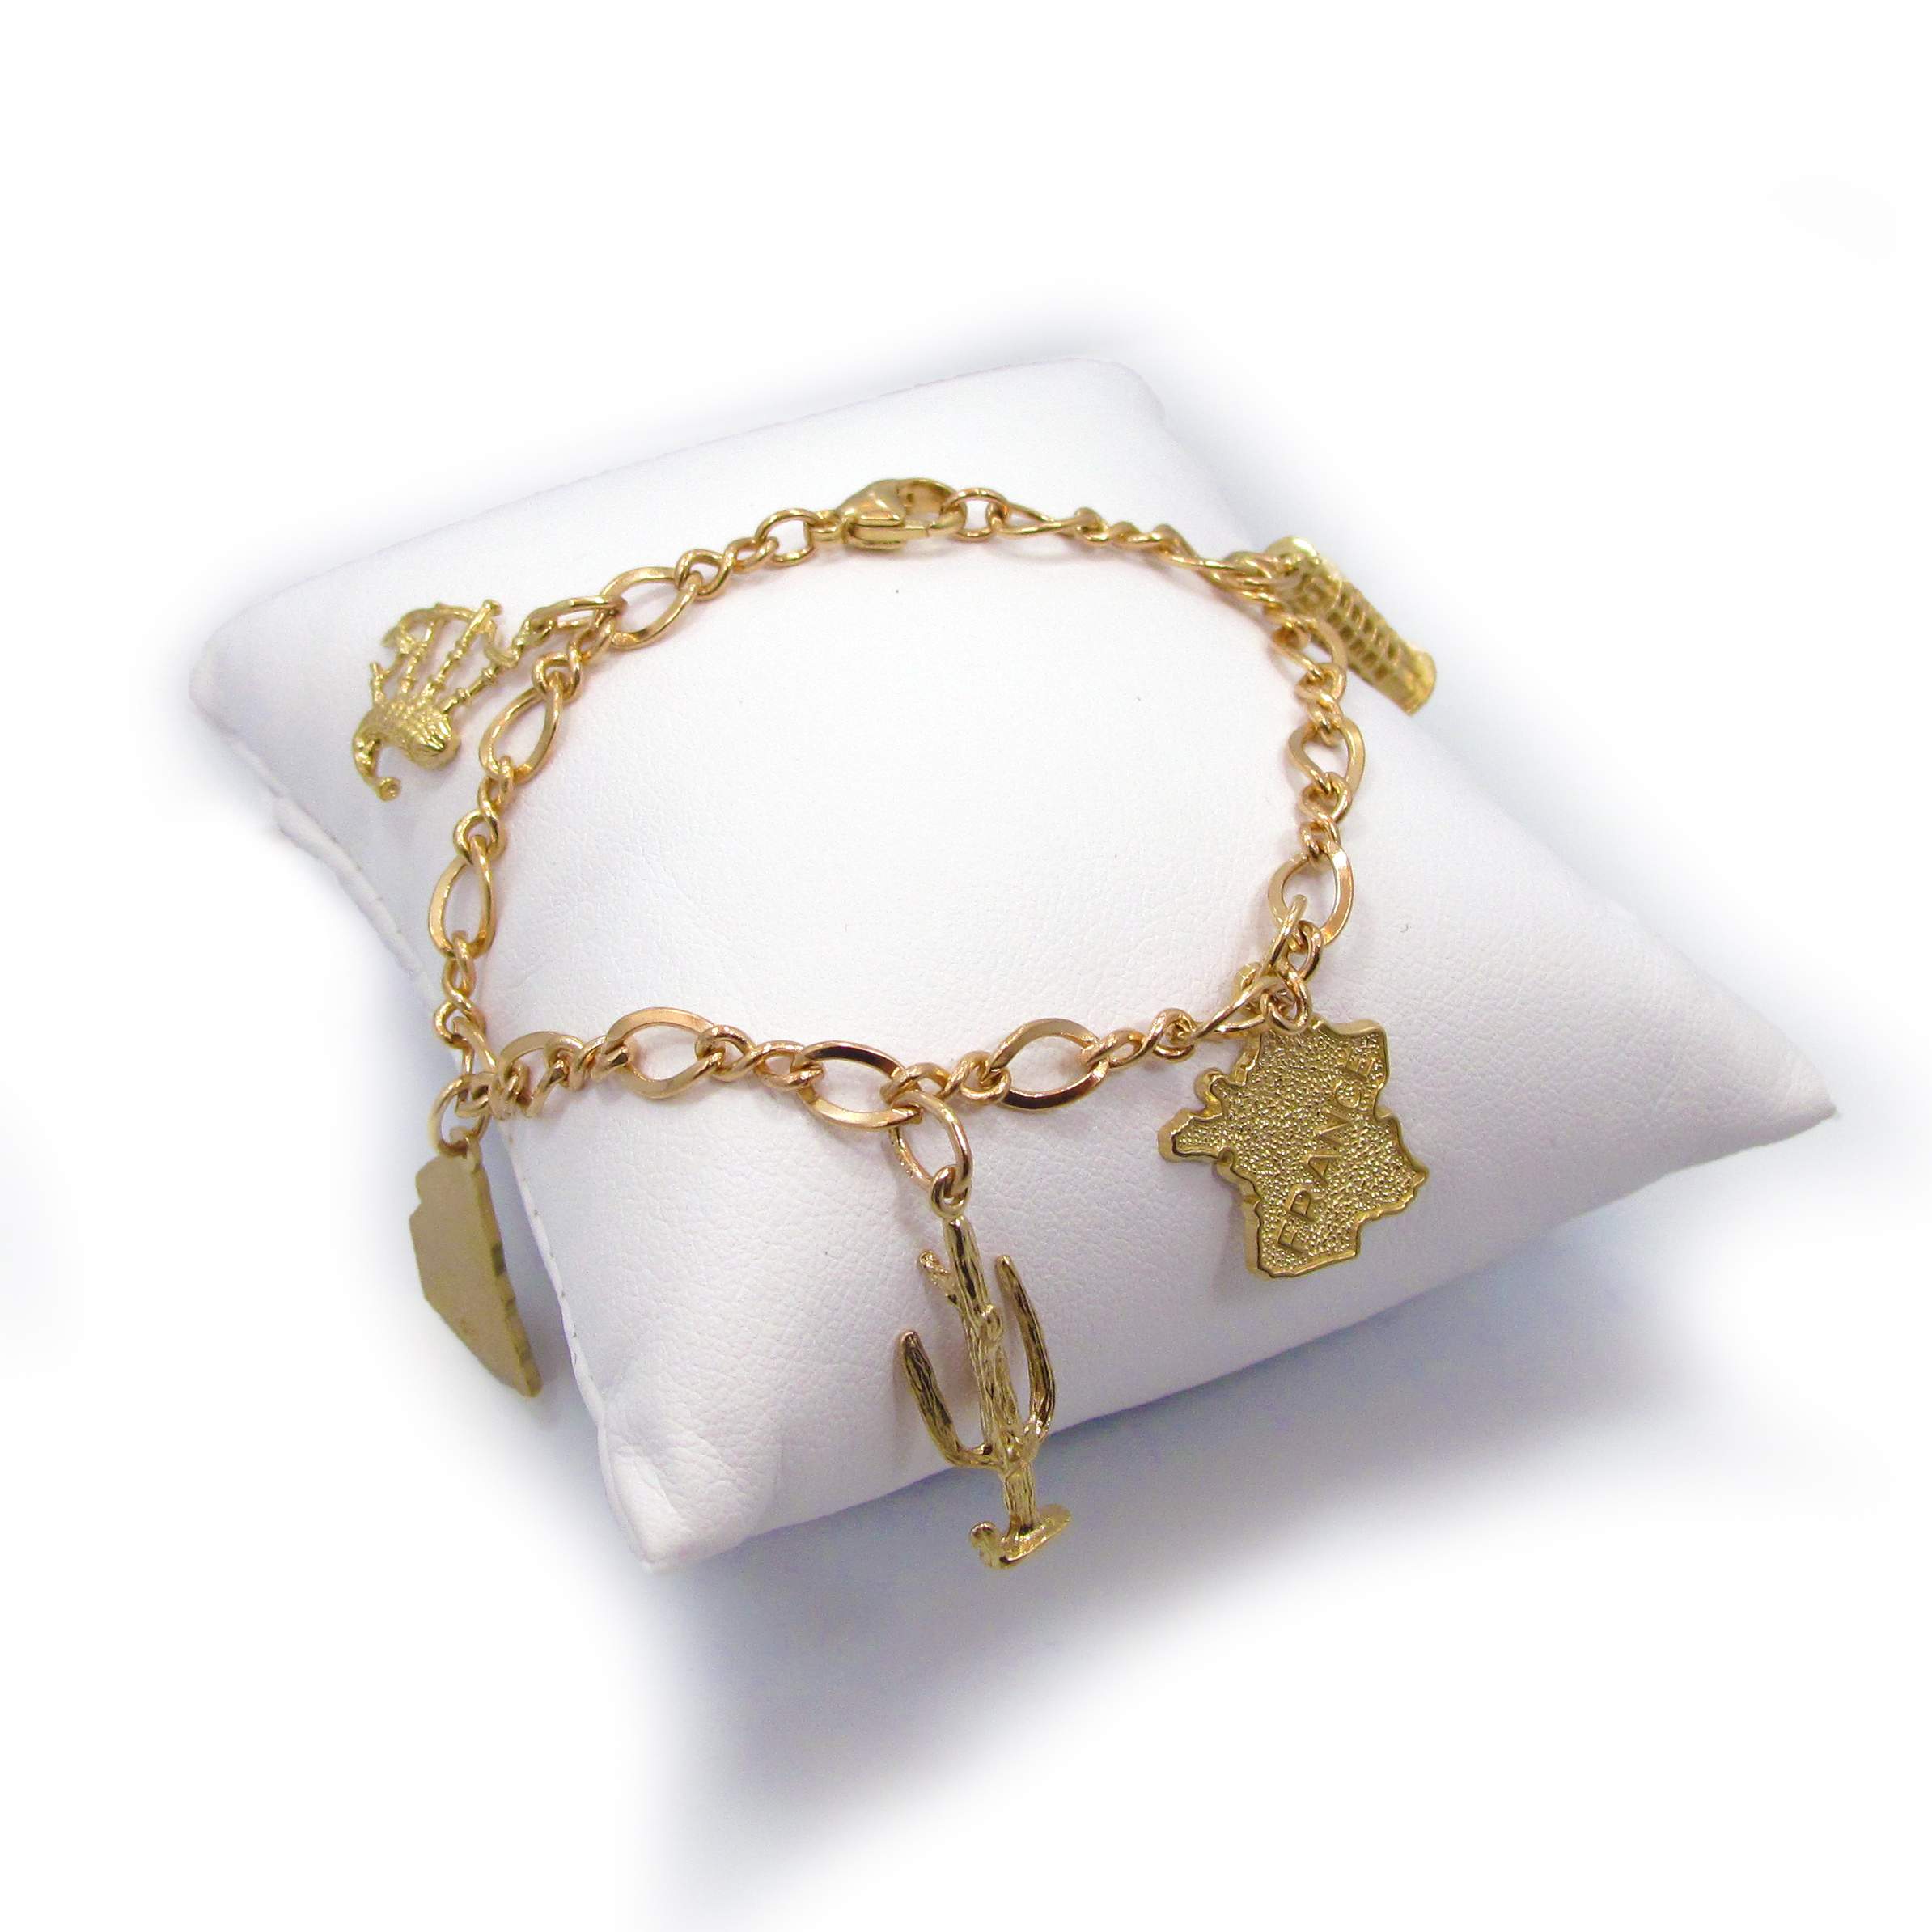 This is a picture of a Customizable 14k Yellow Gold Charm Bracelet